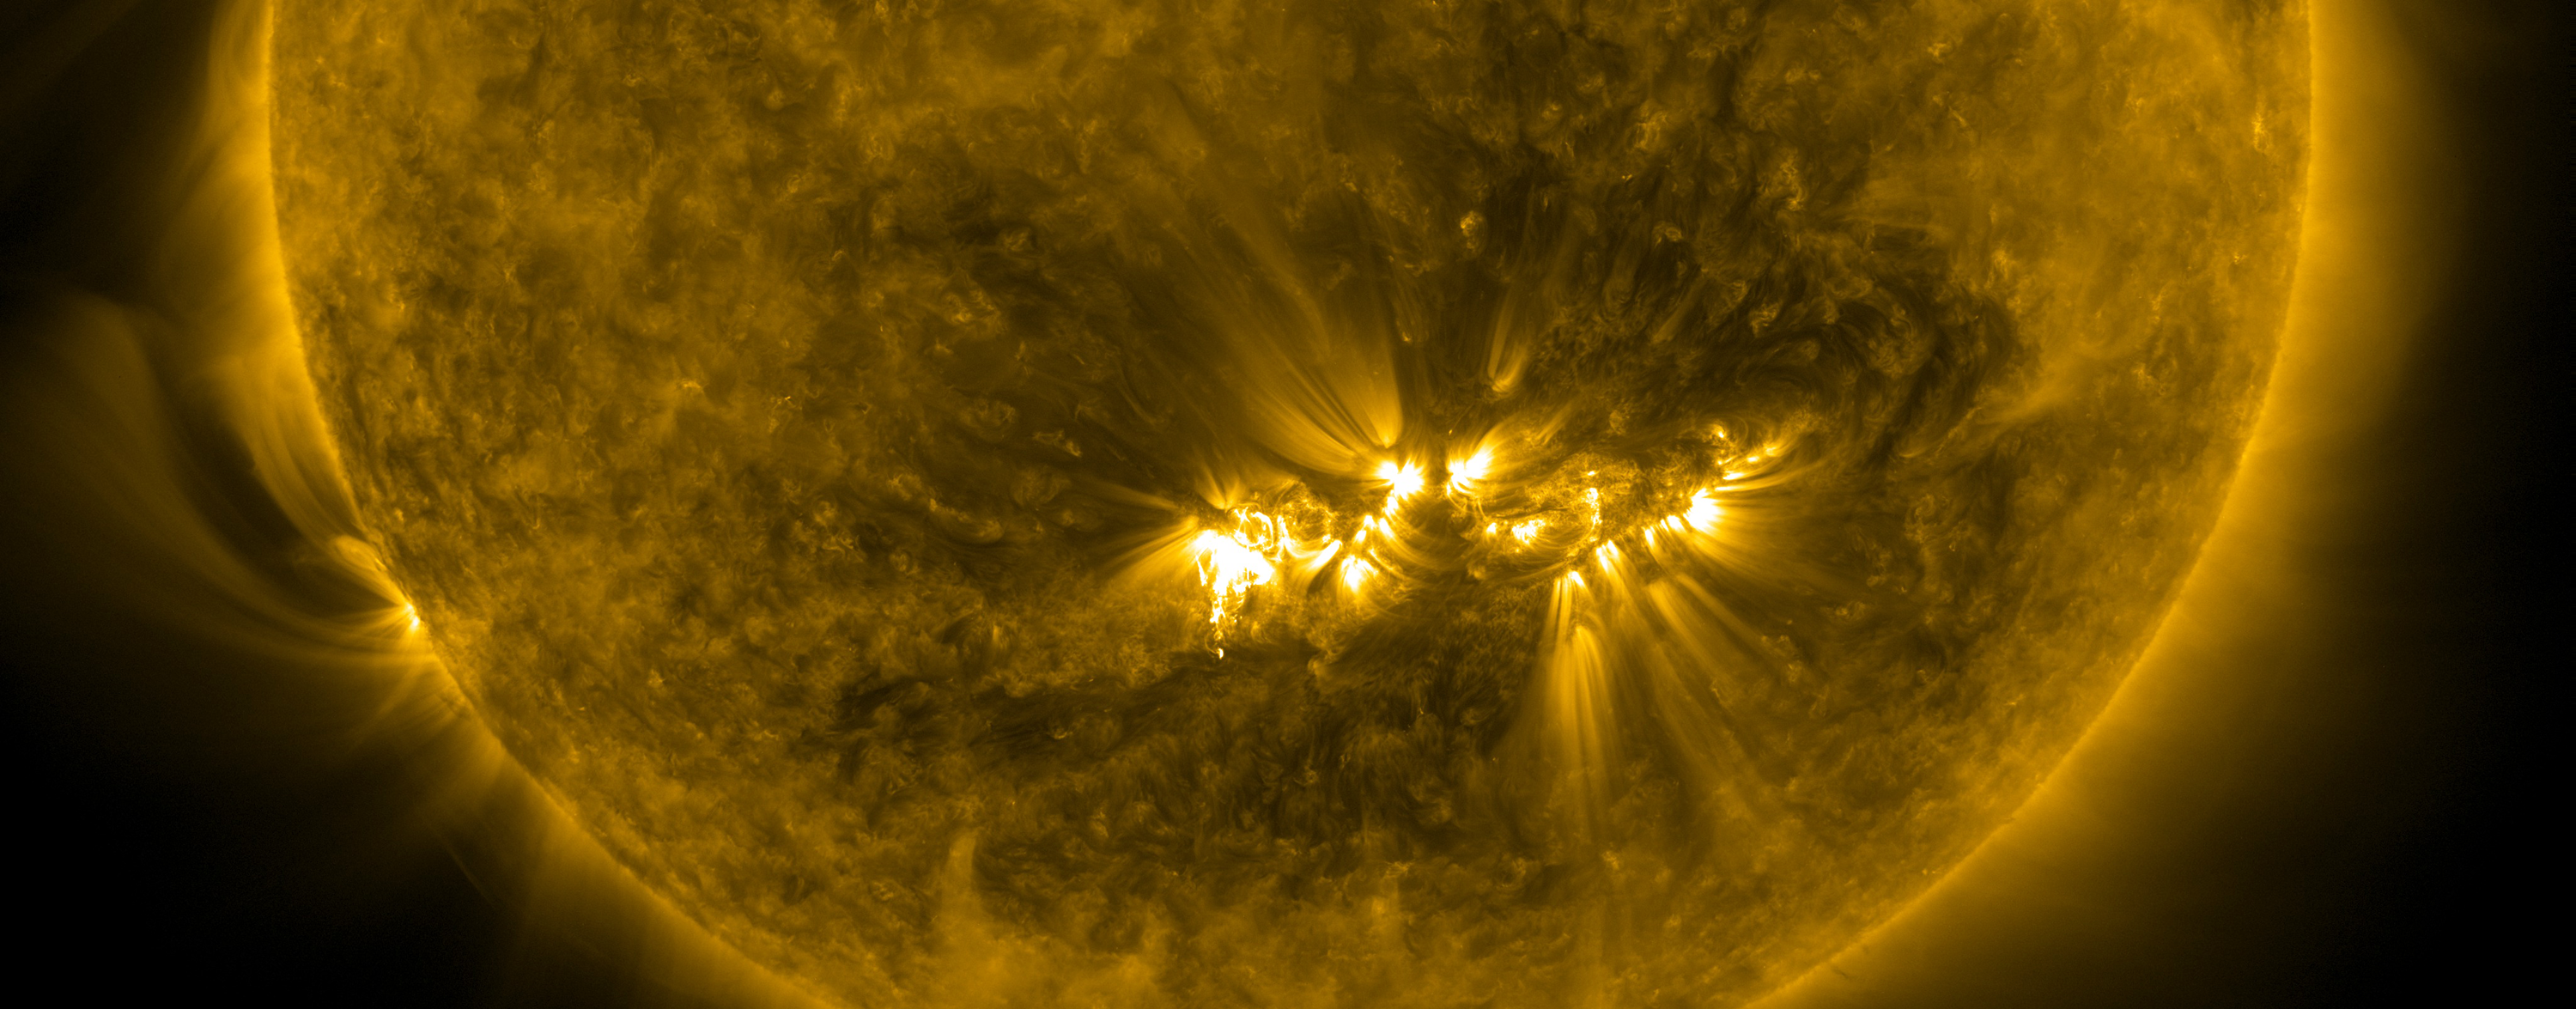 Sunspot complex composed of active regions, AR11121 and AR11123, observed in the 171 angstrom channel of SDO/AIA.